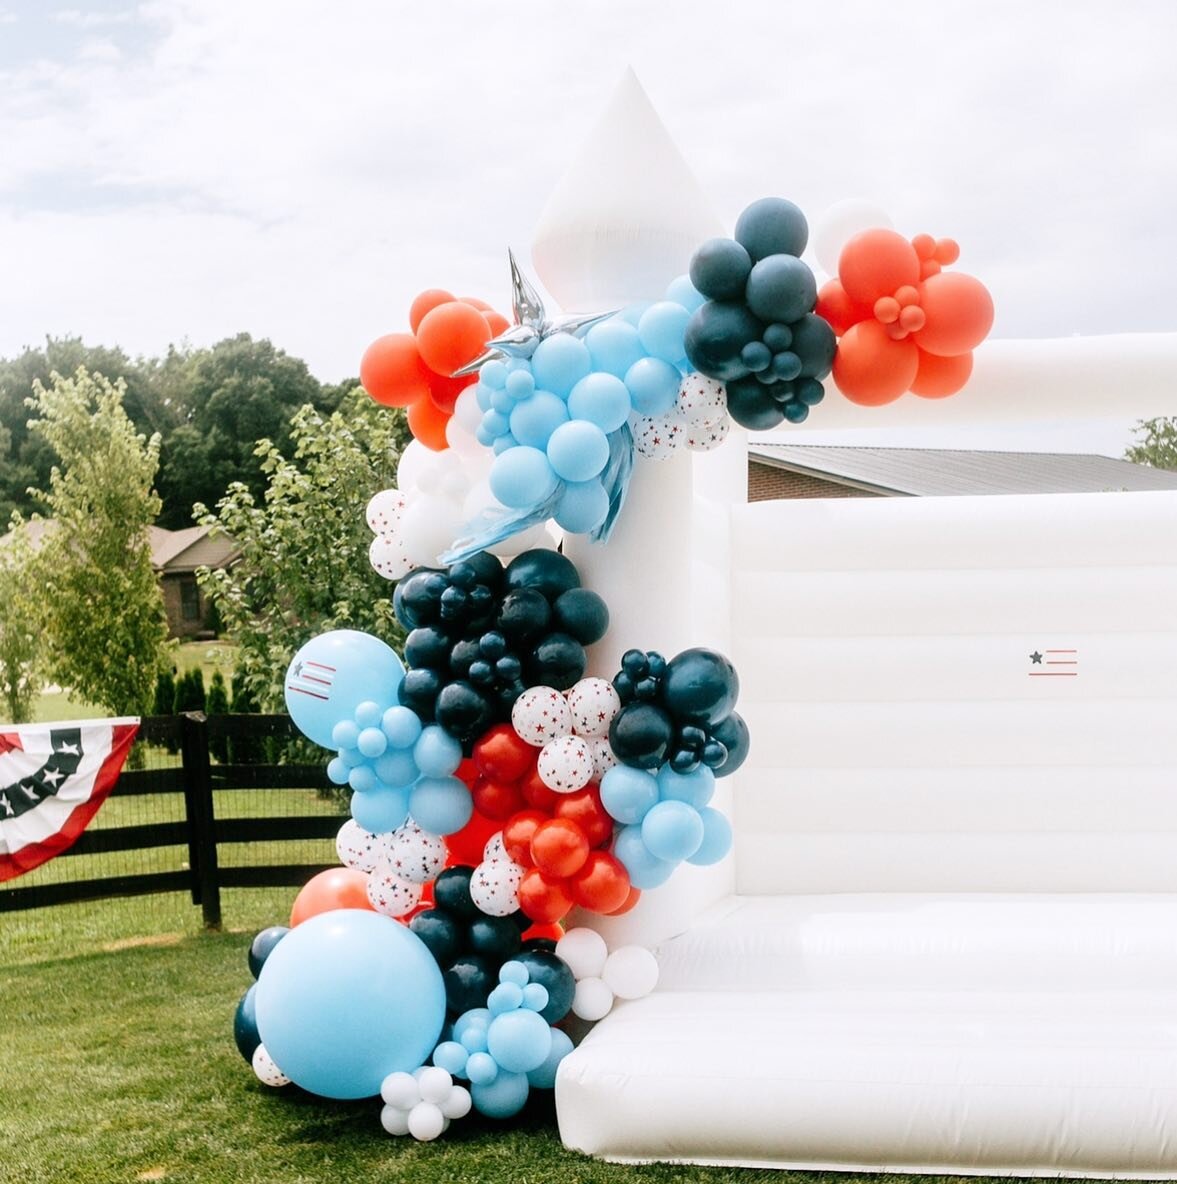 I hope everyone is having a great Labor Day weekend! 🤍💙❤️

bounce house: @inflatelouisville
balloons: @inflatelouisville
photo: @sidneyobrienphoto